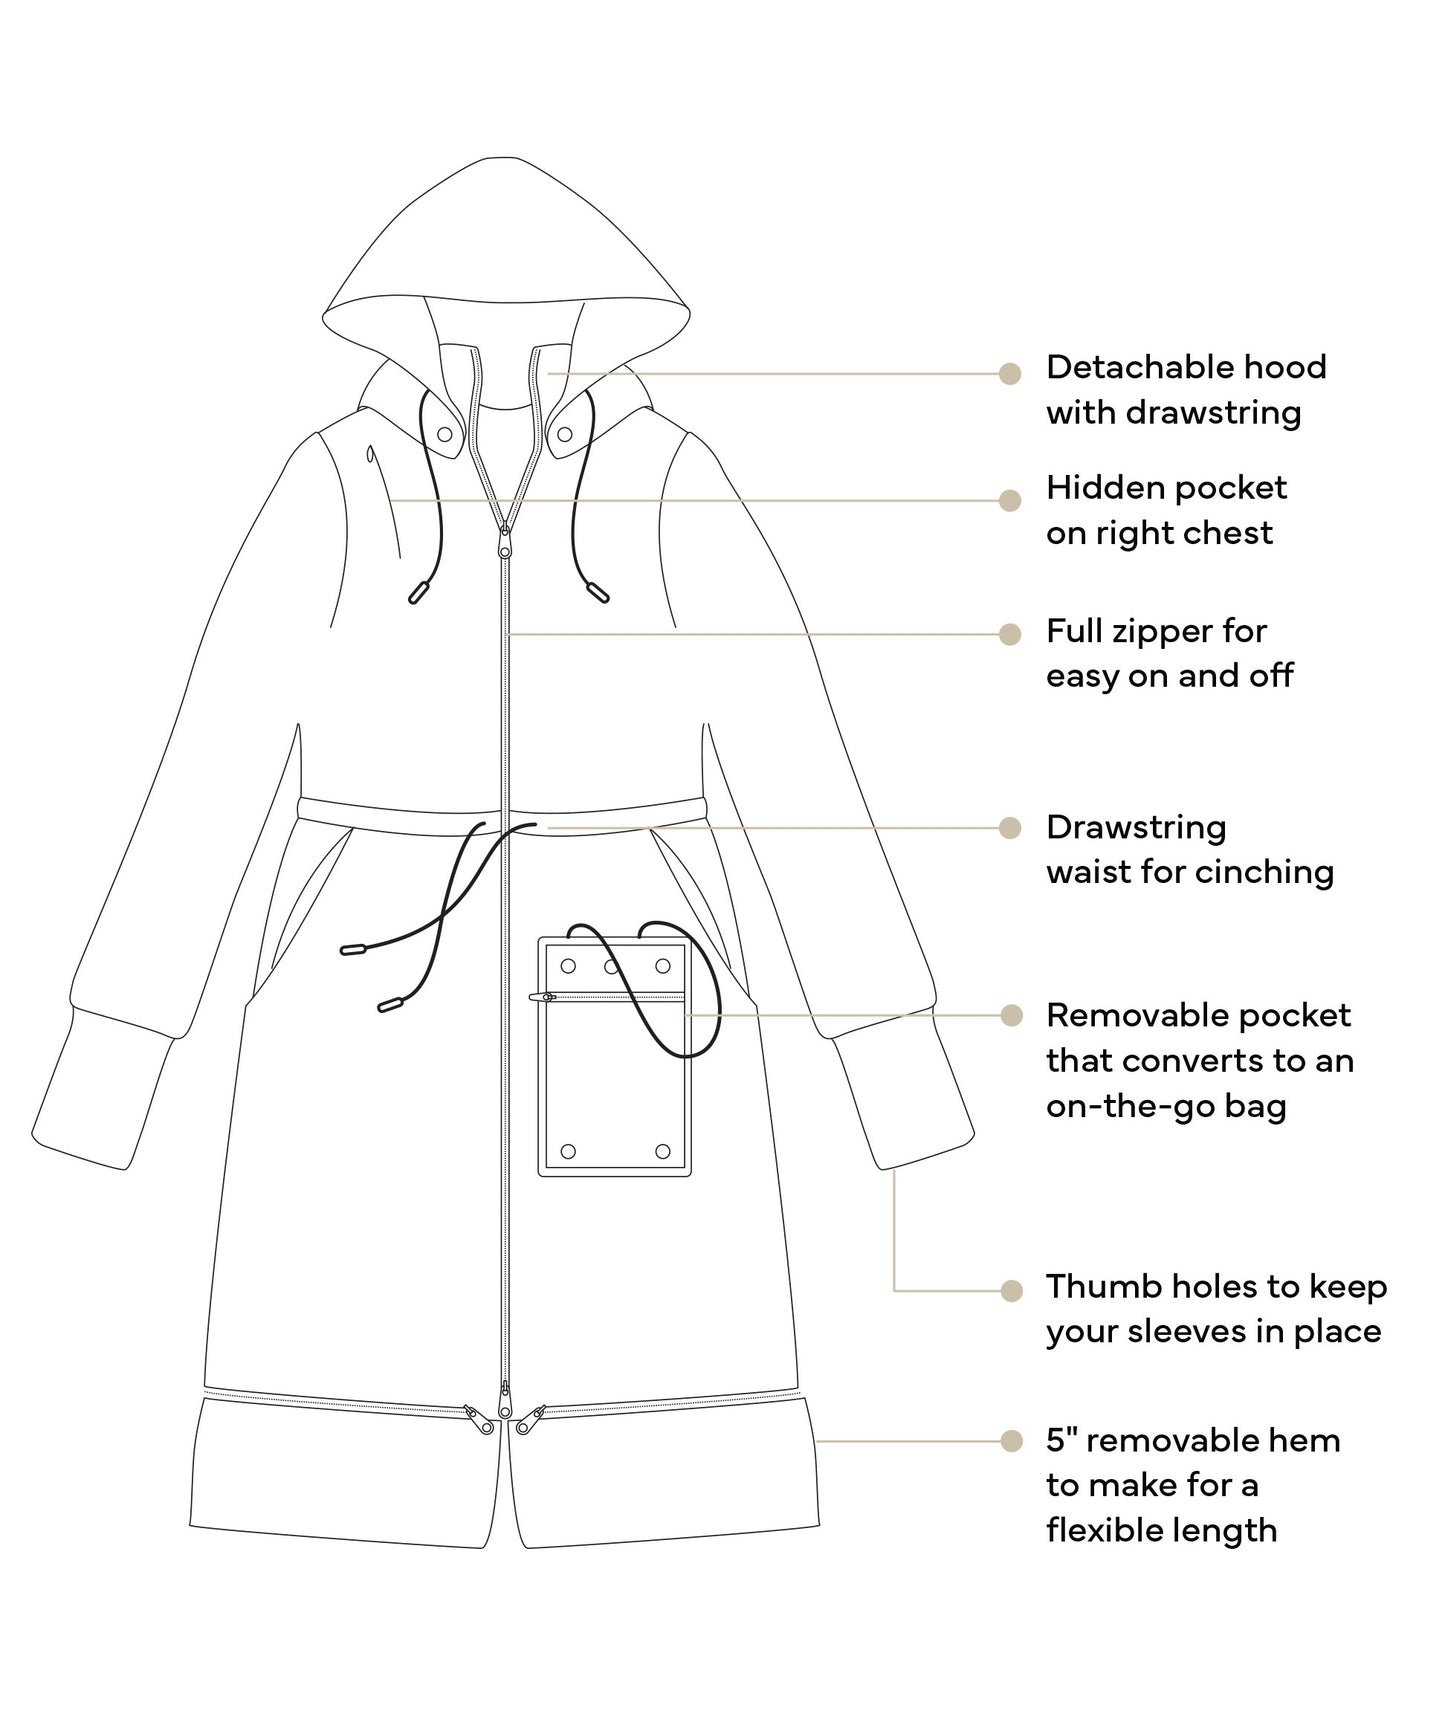 REDISwess functional garment features